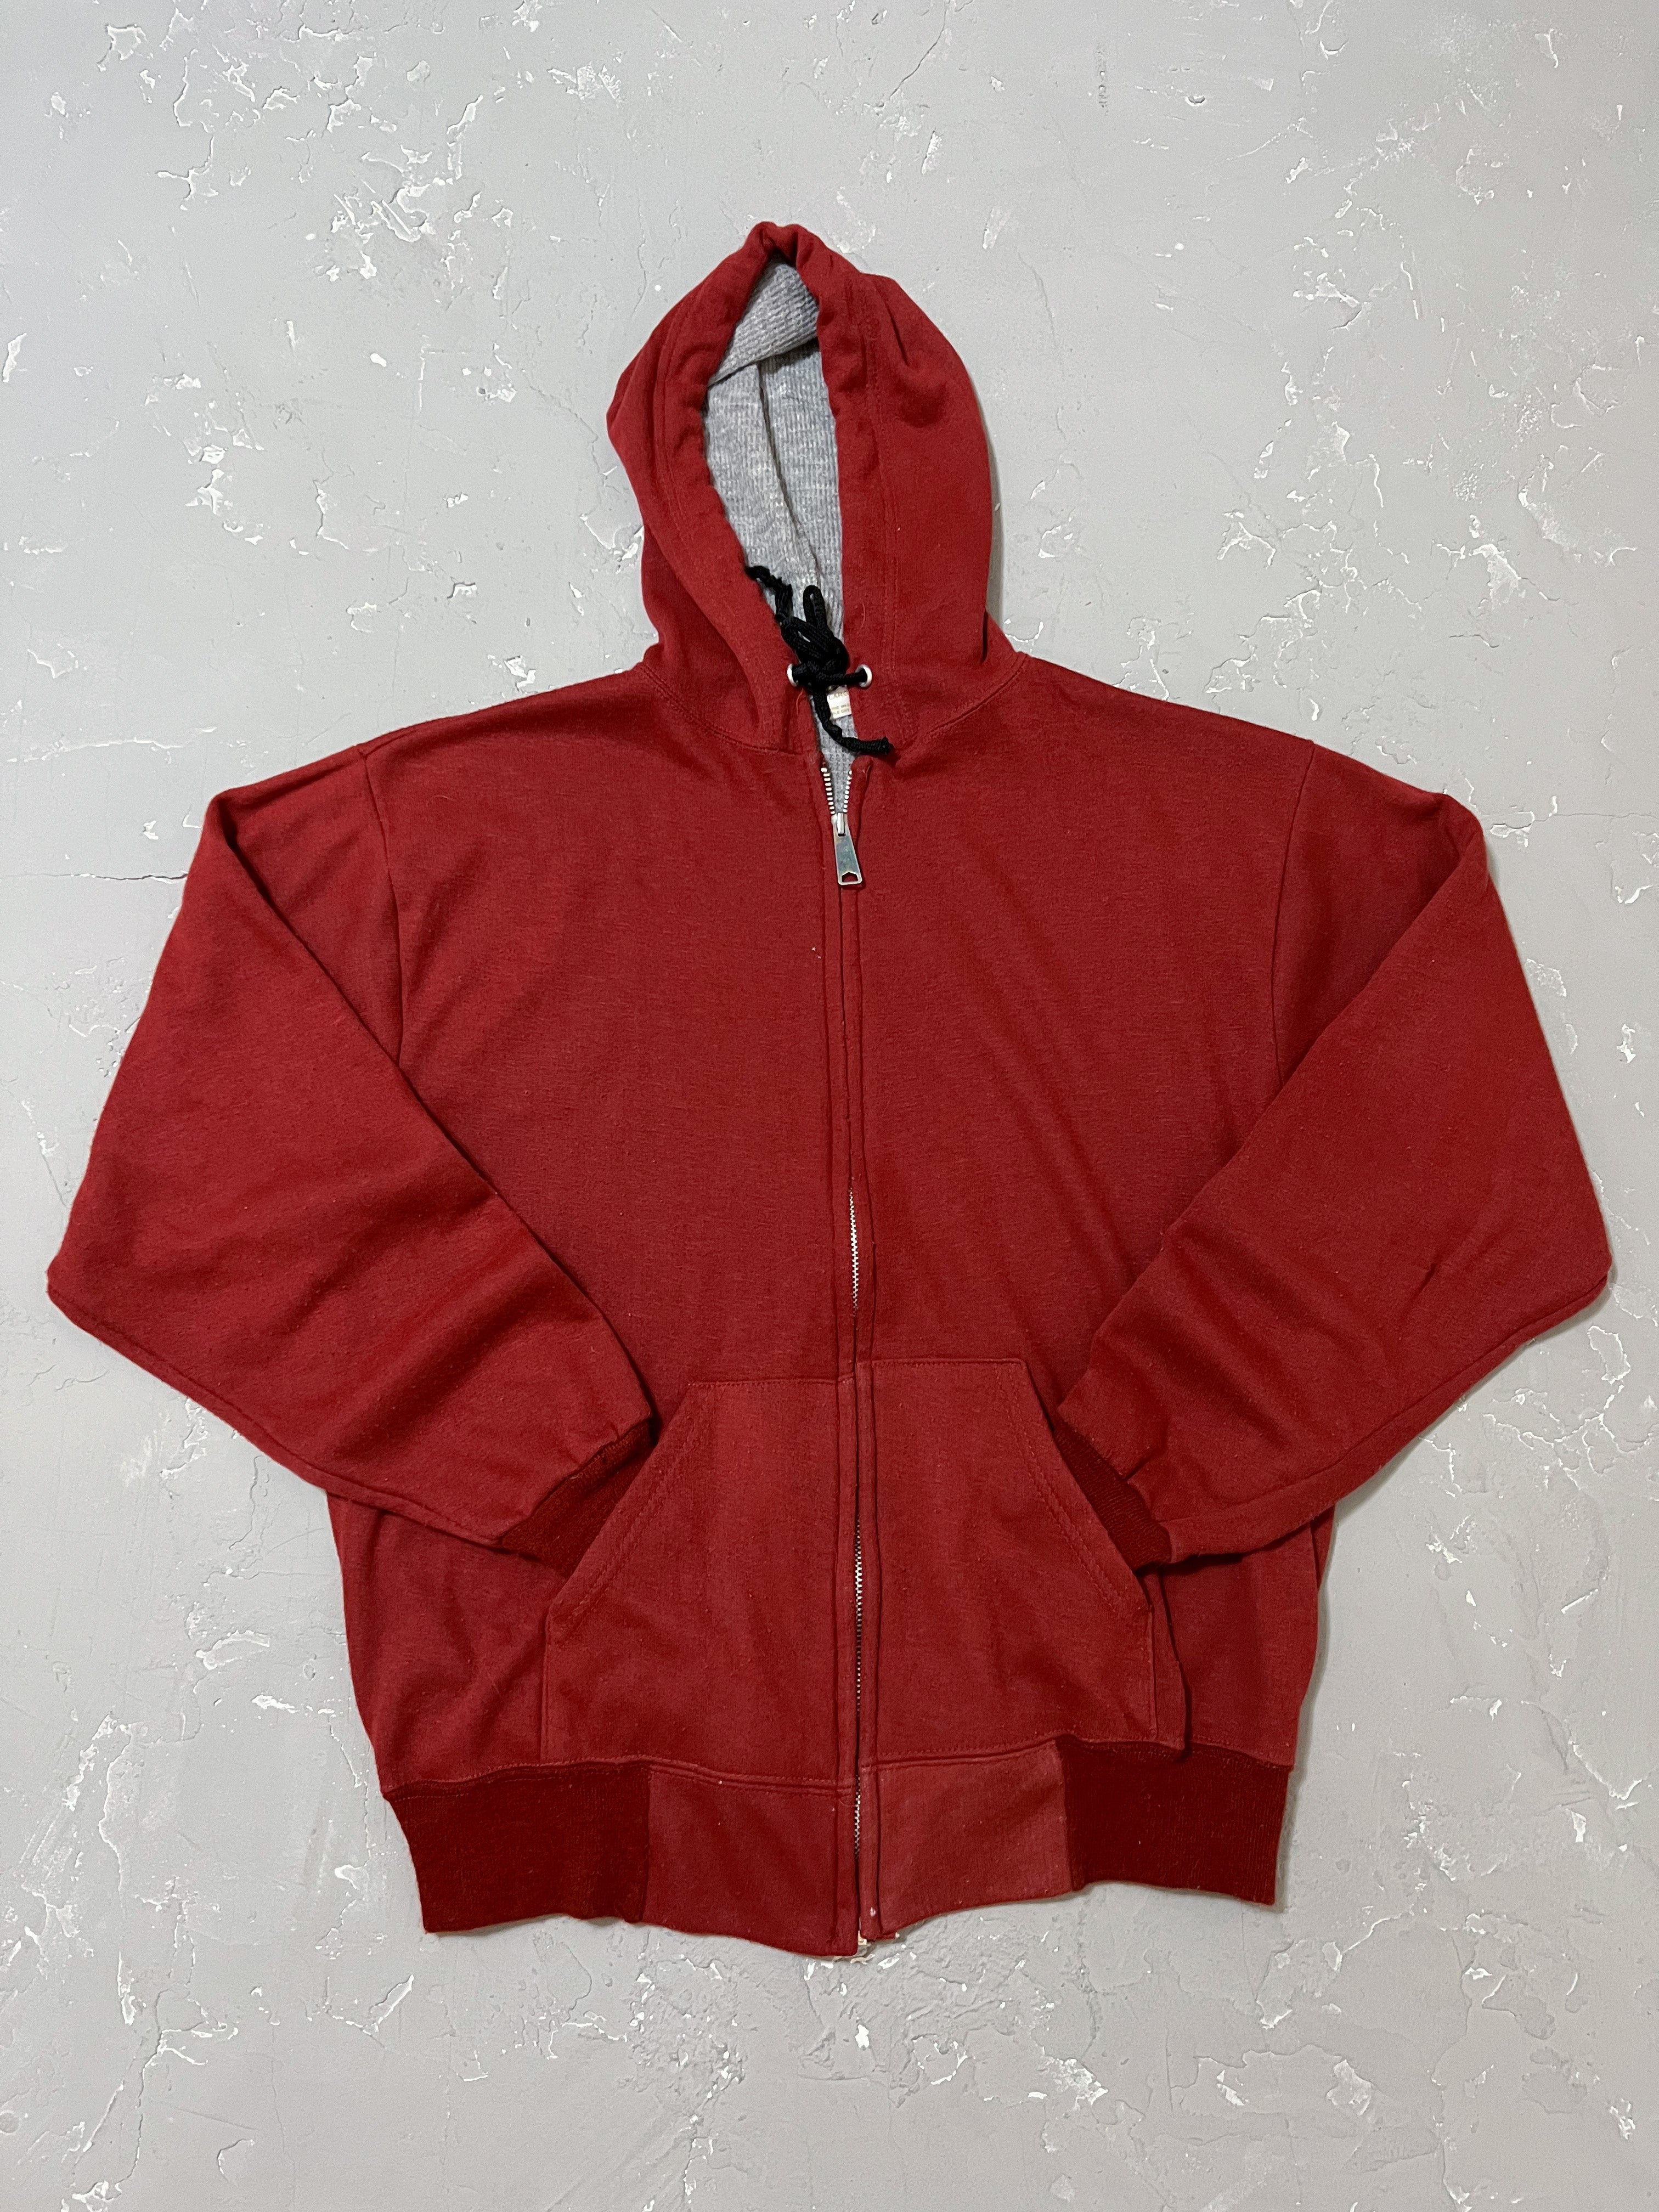 1980s Two Tone Thermal Lined Zip Up Hoodie [L]